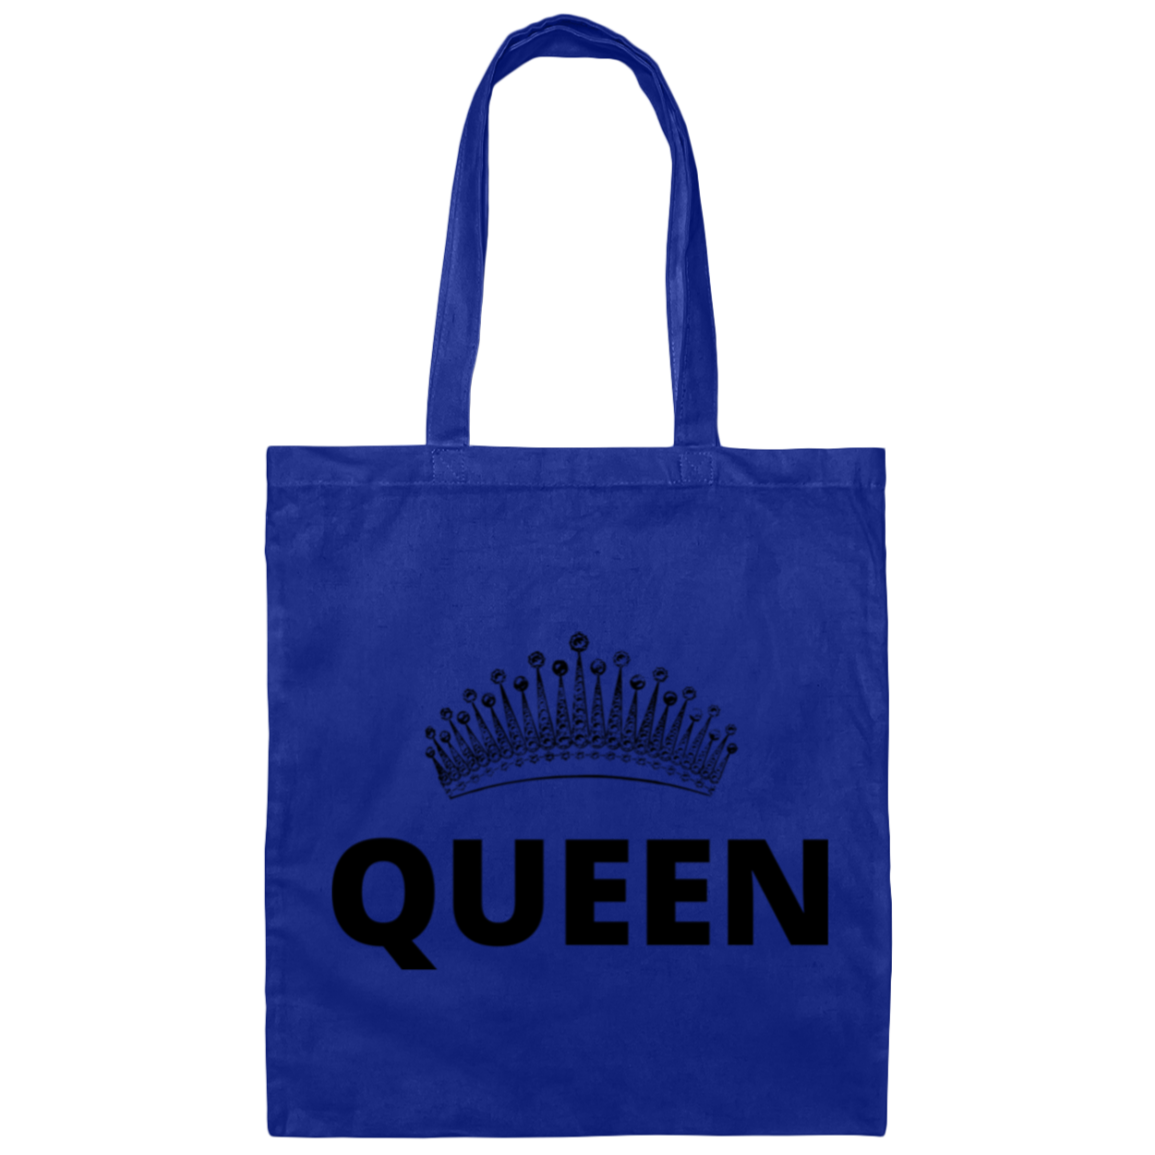 Queen w/Crown - Tote Bag